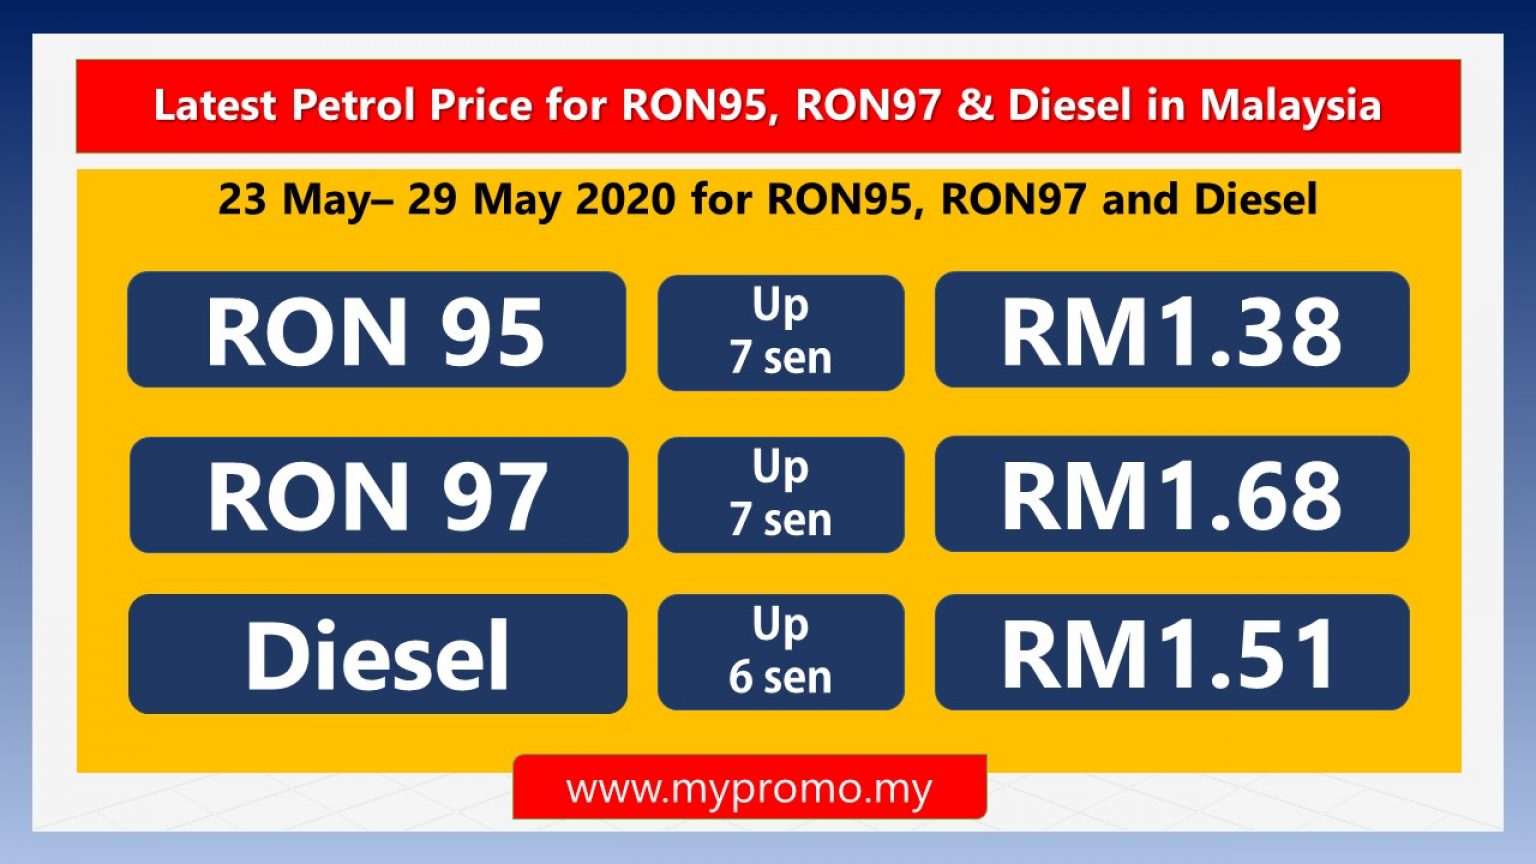 Latest Petrol Price for RON95, RON97 & Diesel in Malaysia ...